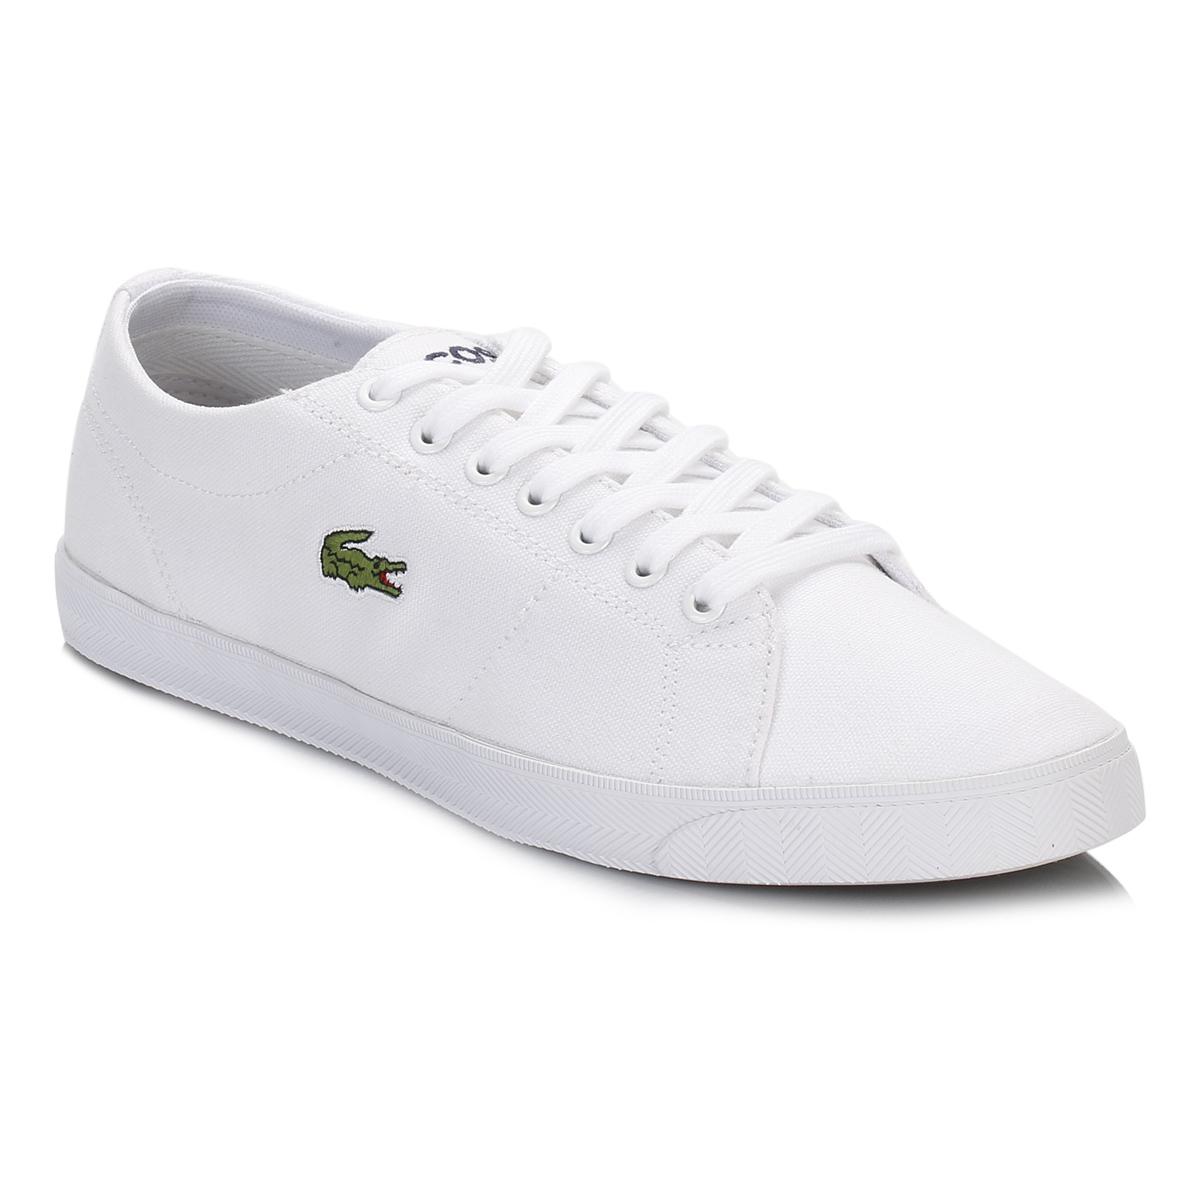 Lacoste Marcel Mens Trainers Flash Sales, SAVE 54%.